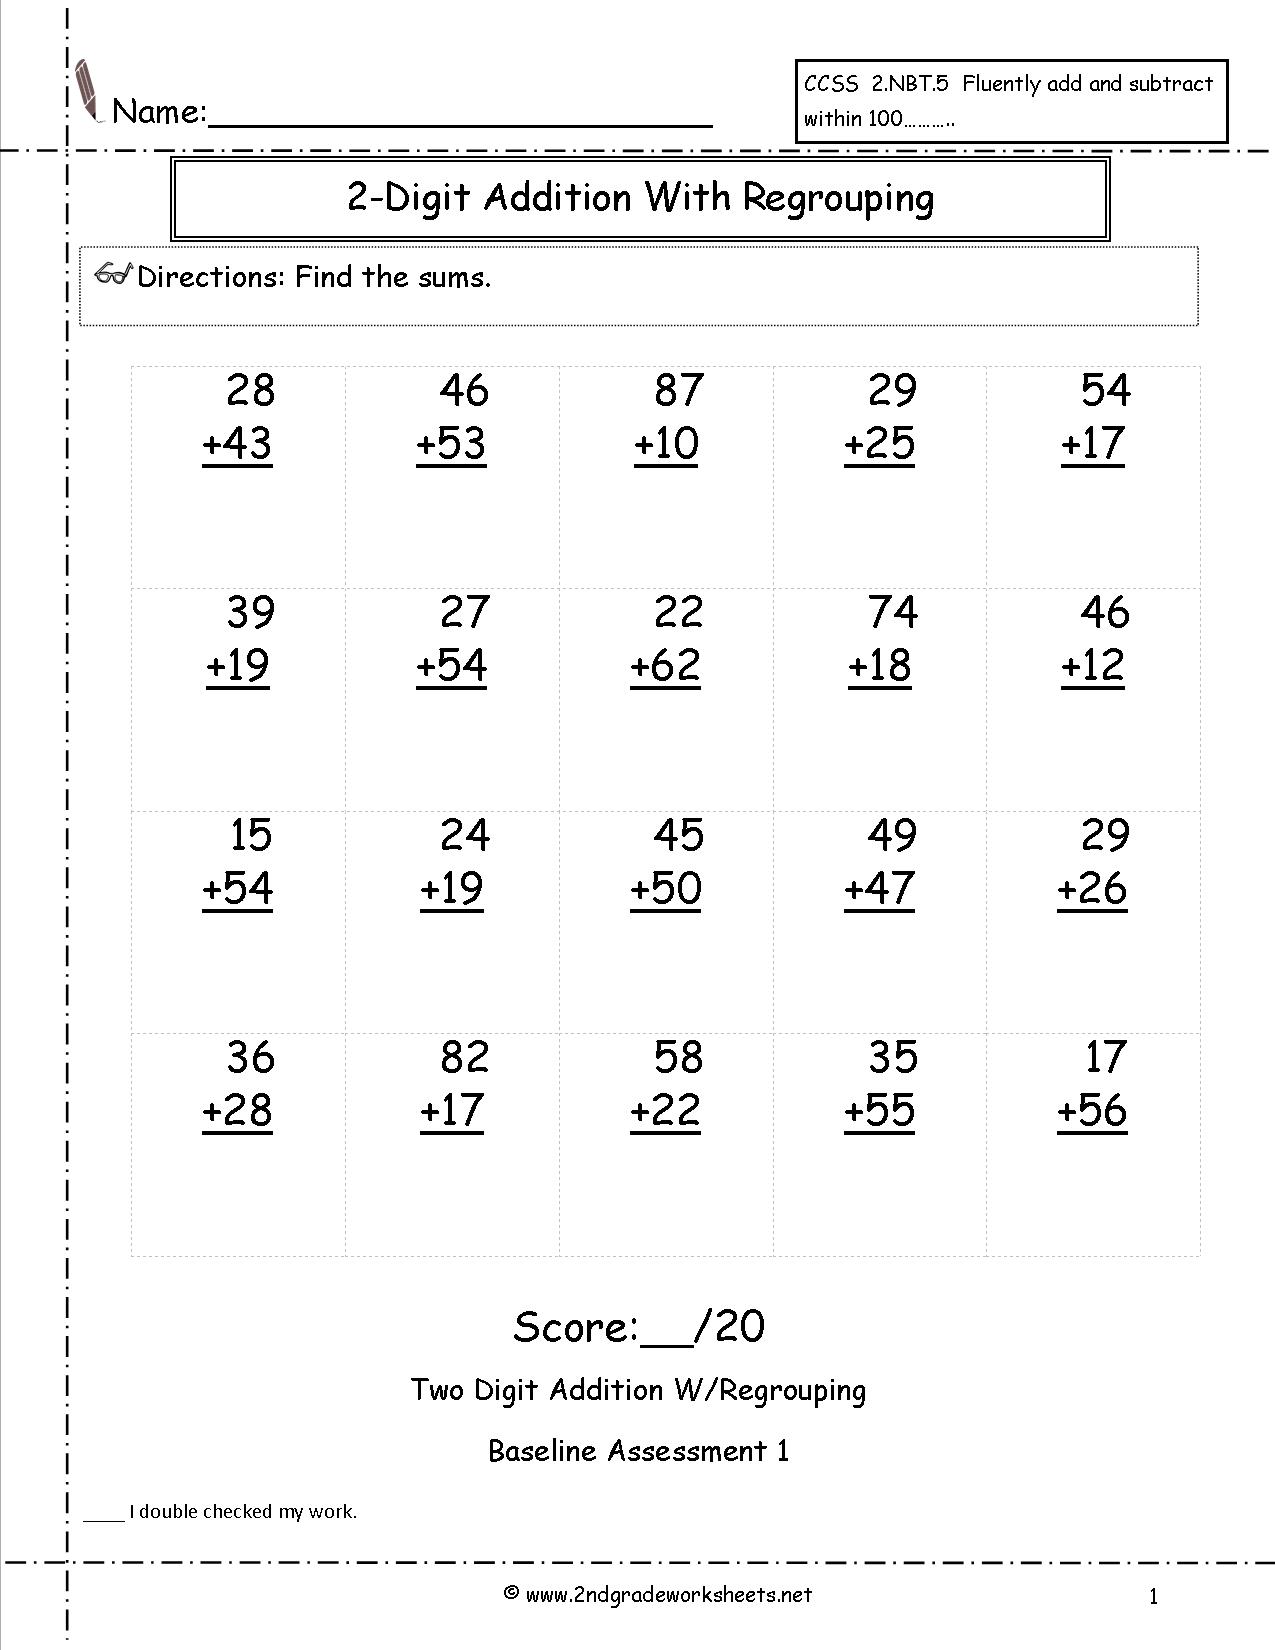 triple-digit-addition-without-regrouping-worksheet-have-fun-teaching